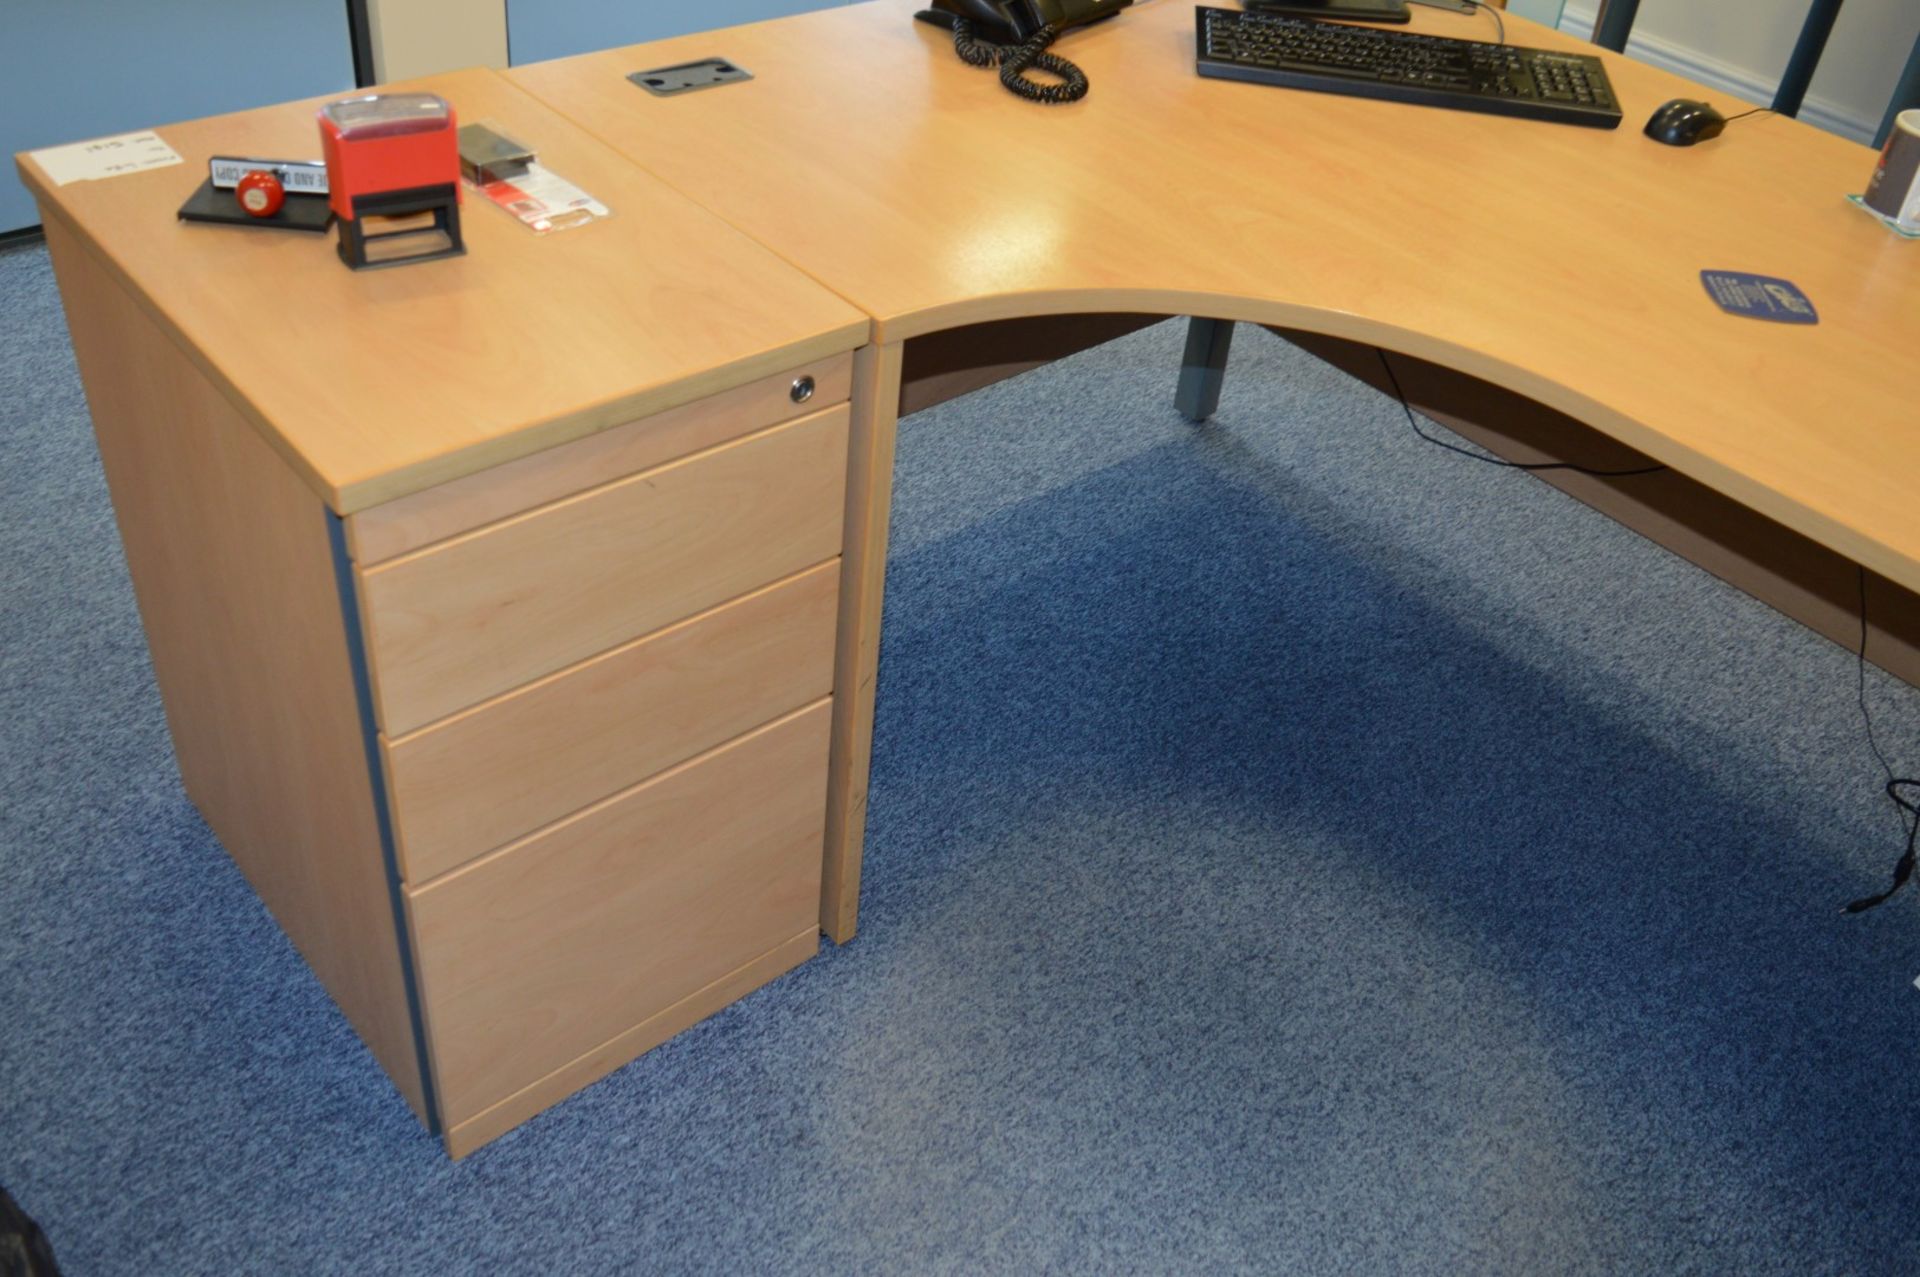 1 x Office Furniture Set Including Office Desk, Swivel Chair and Two Pedestal Units - Beech Finish - - Image 4 of 6